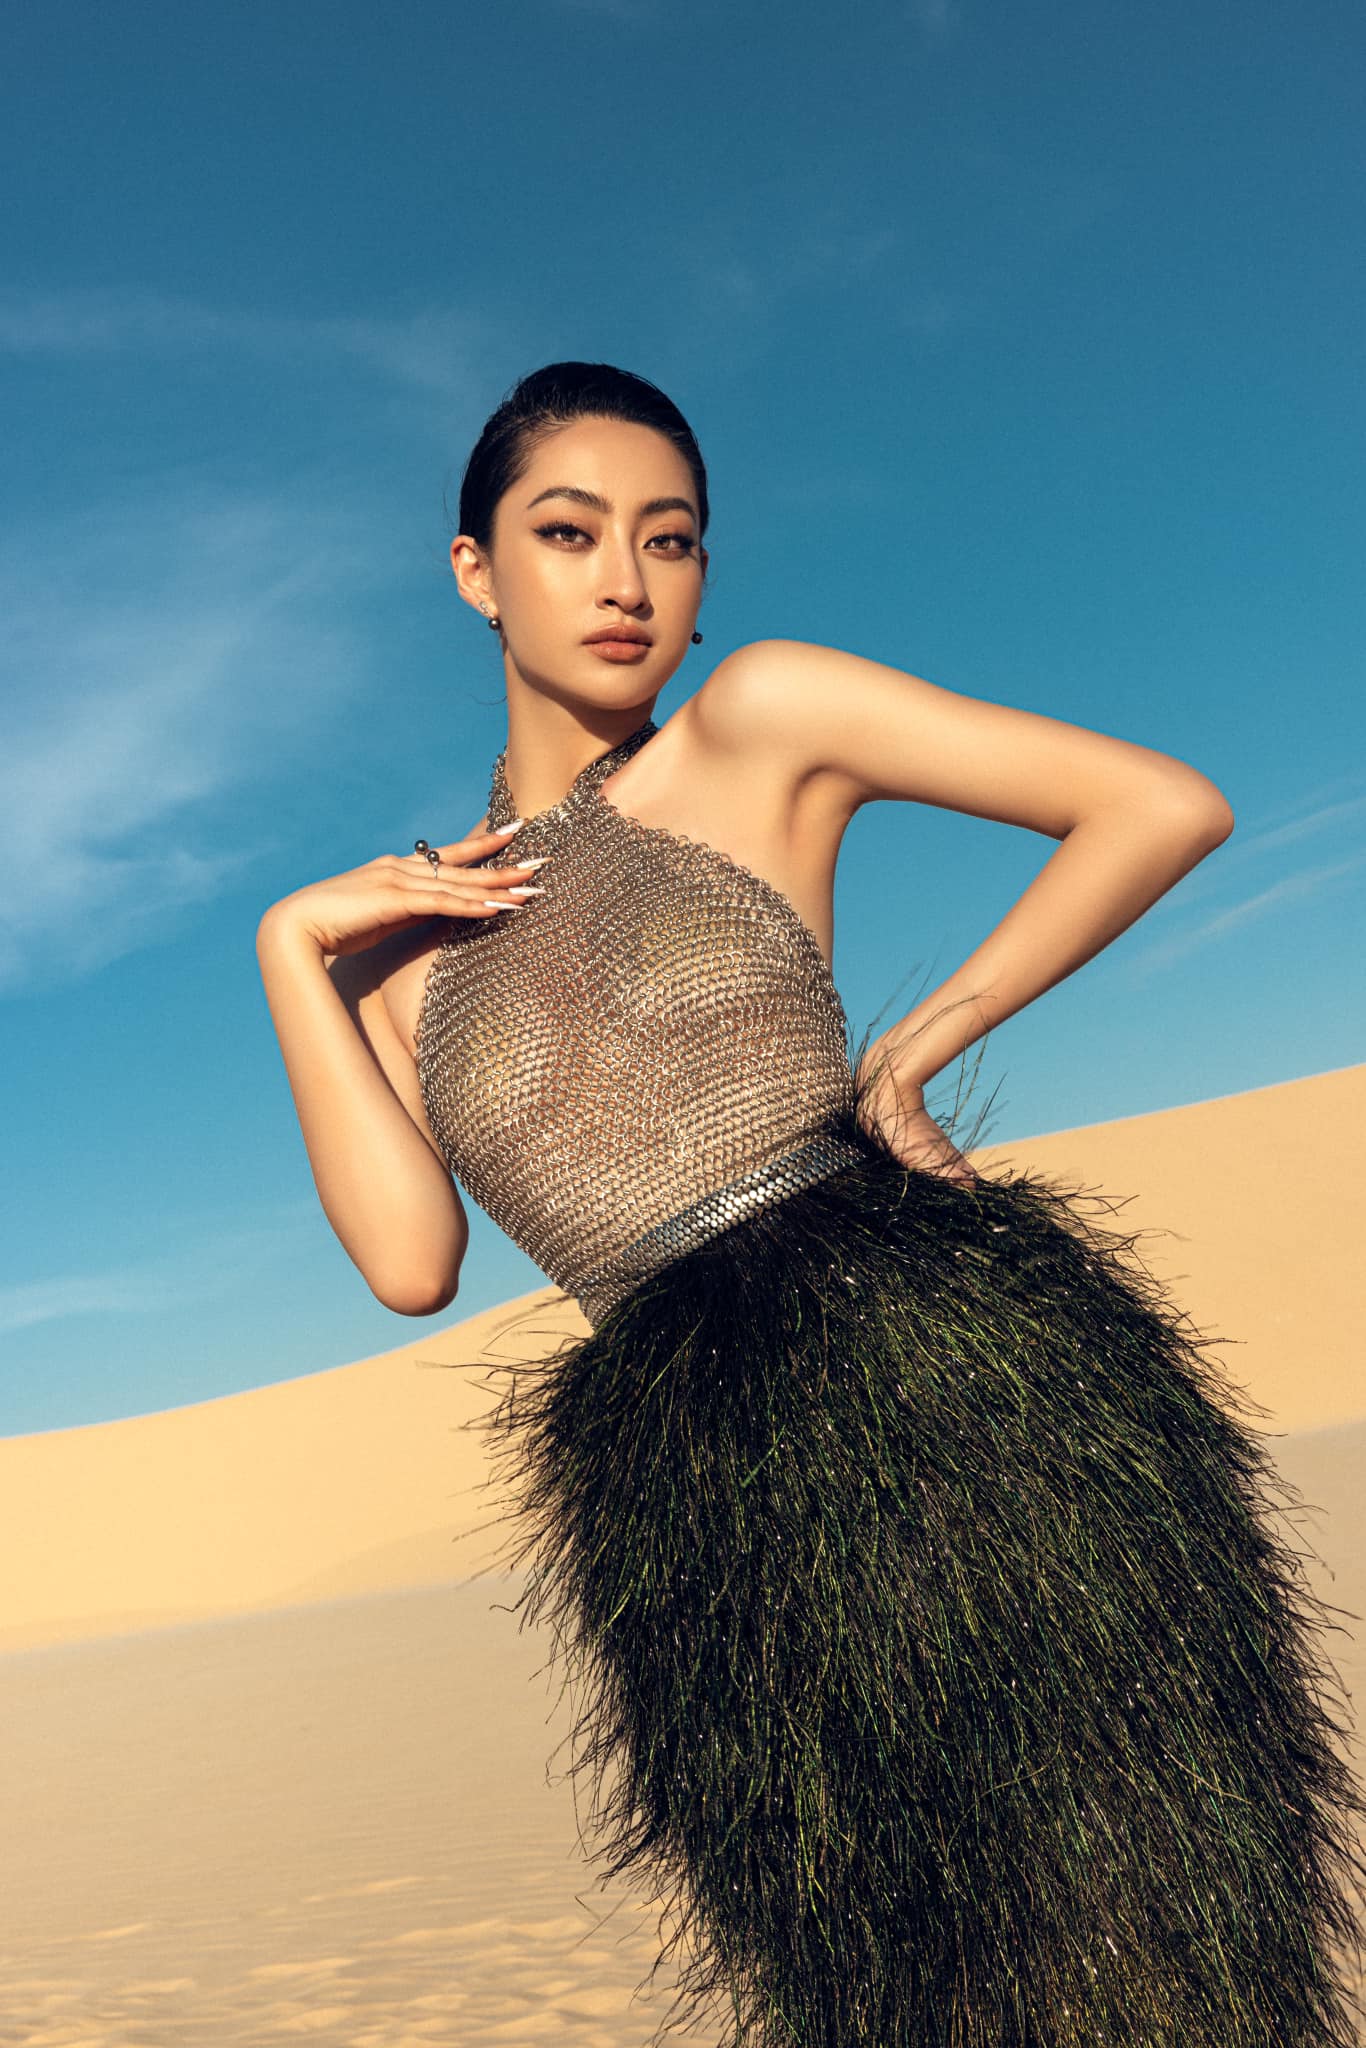 Luong Thuy Linh released a series of photos of penetrating clothes: Body and visual are both stable, the boldness makes netizens gasp - Photo 5.